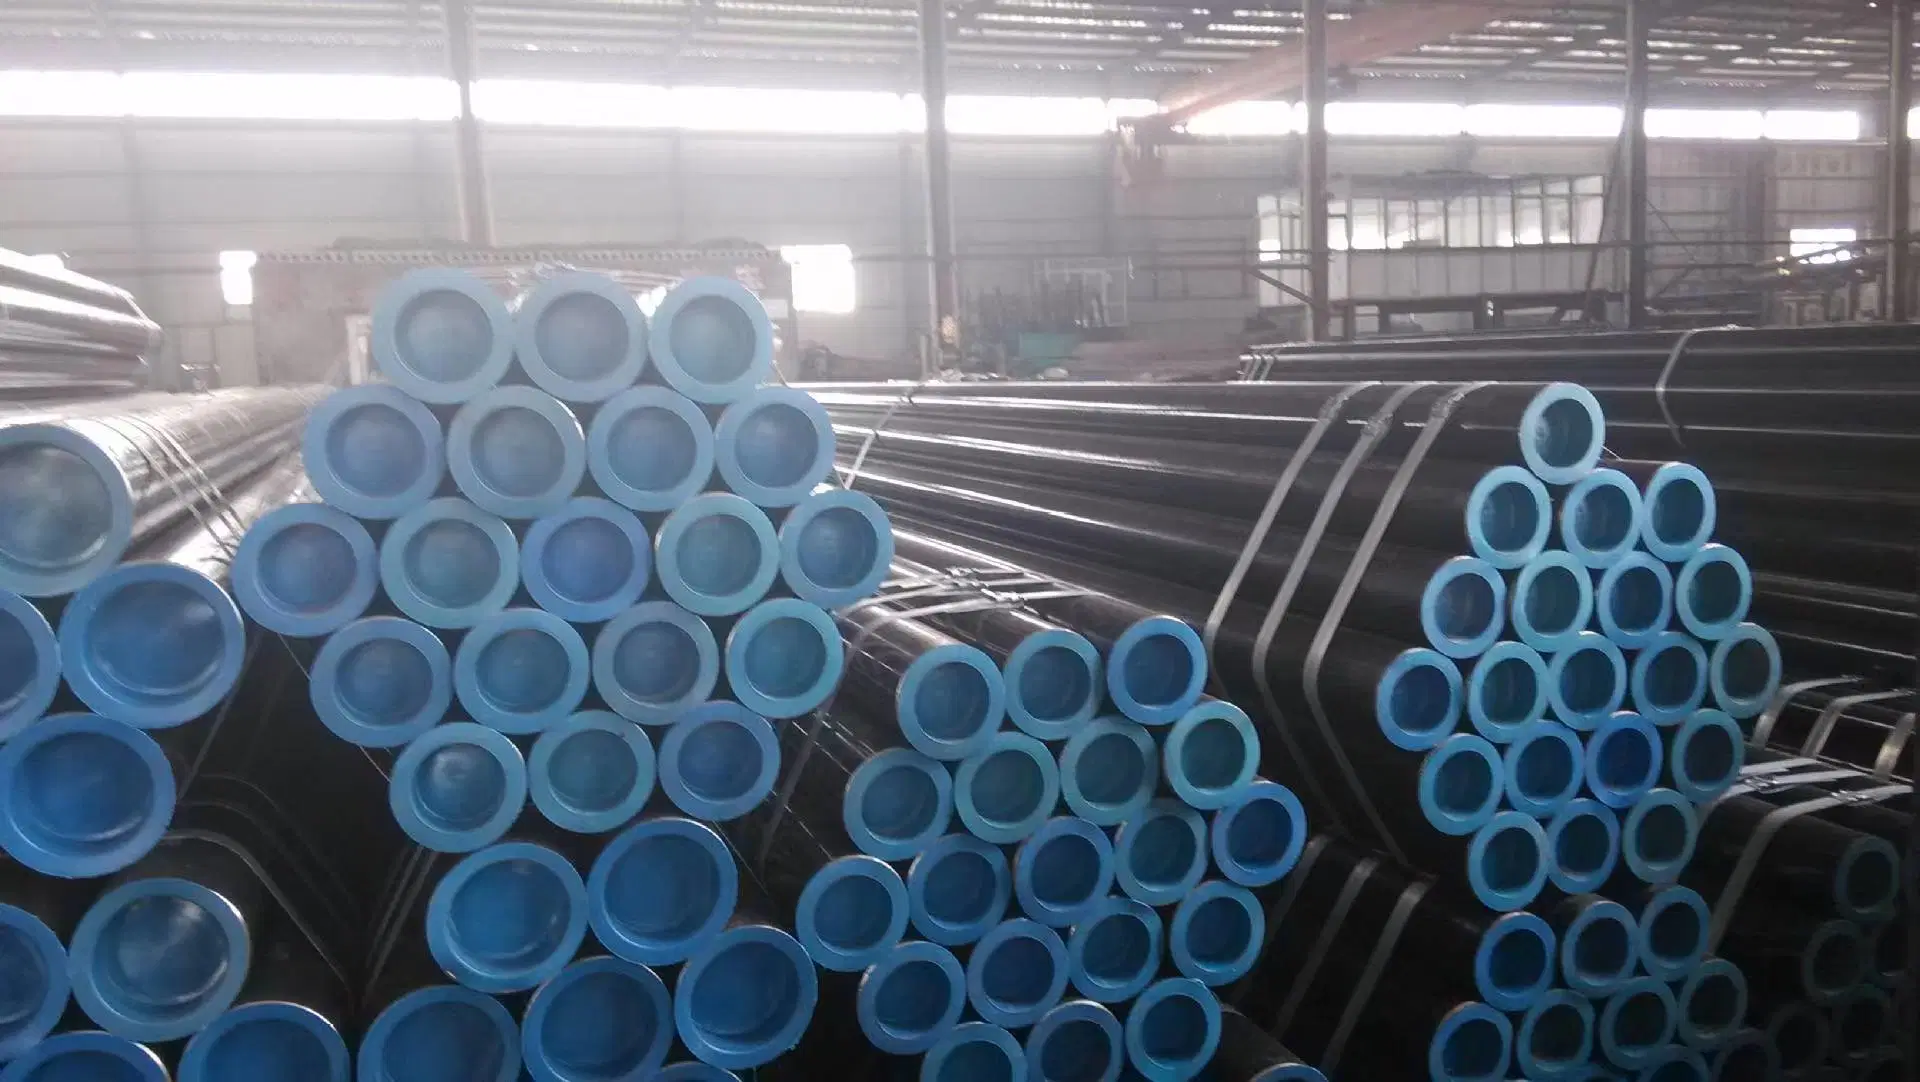 ASTM Sch80 Anti-Corrosion ASME API GOST DIN En JIS Steel Pipe Galvanised Tube Sch40 Alloy Pipeage Seamless Pipe Carbon Steel Pipe